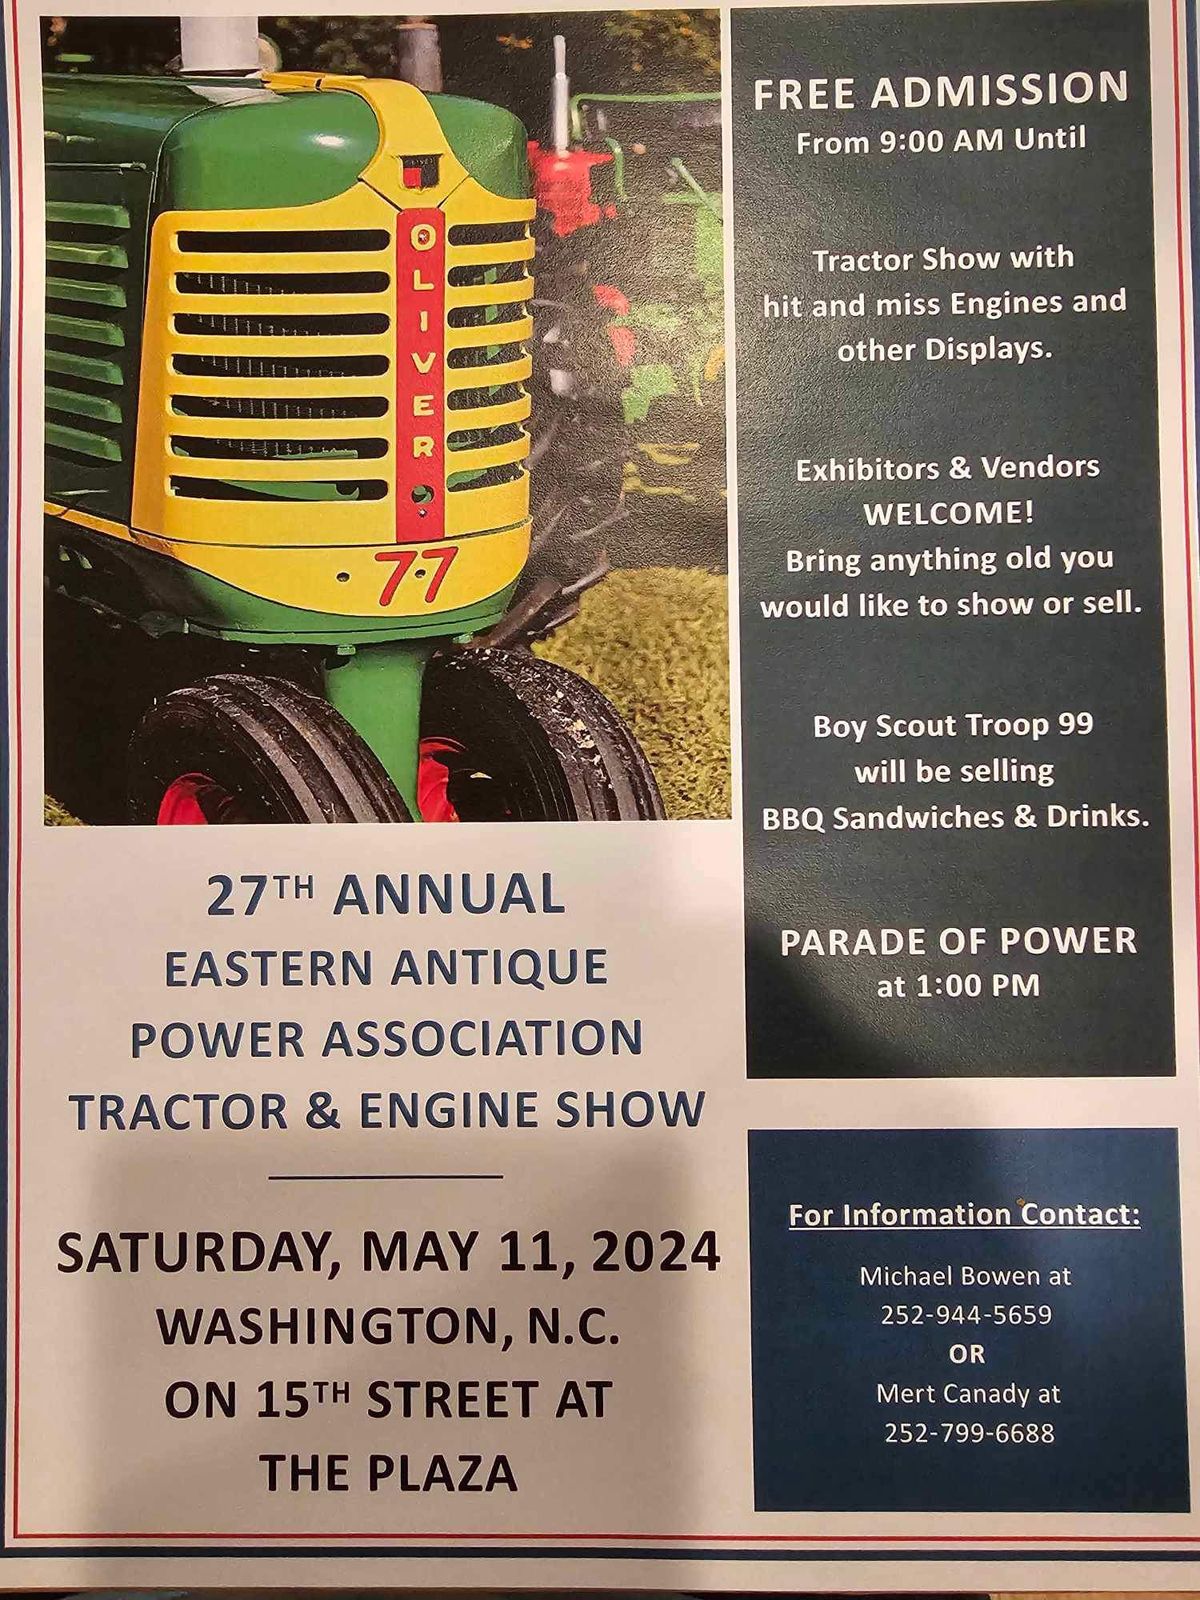 27th Annual Eastern Antique Power Association Tractor & Engine Show 